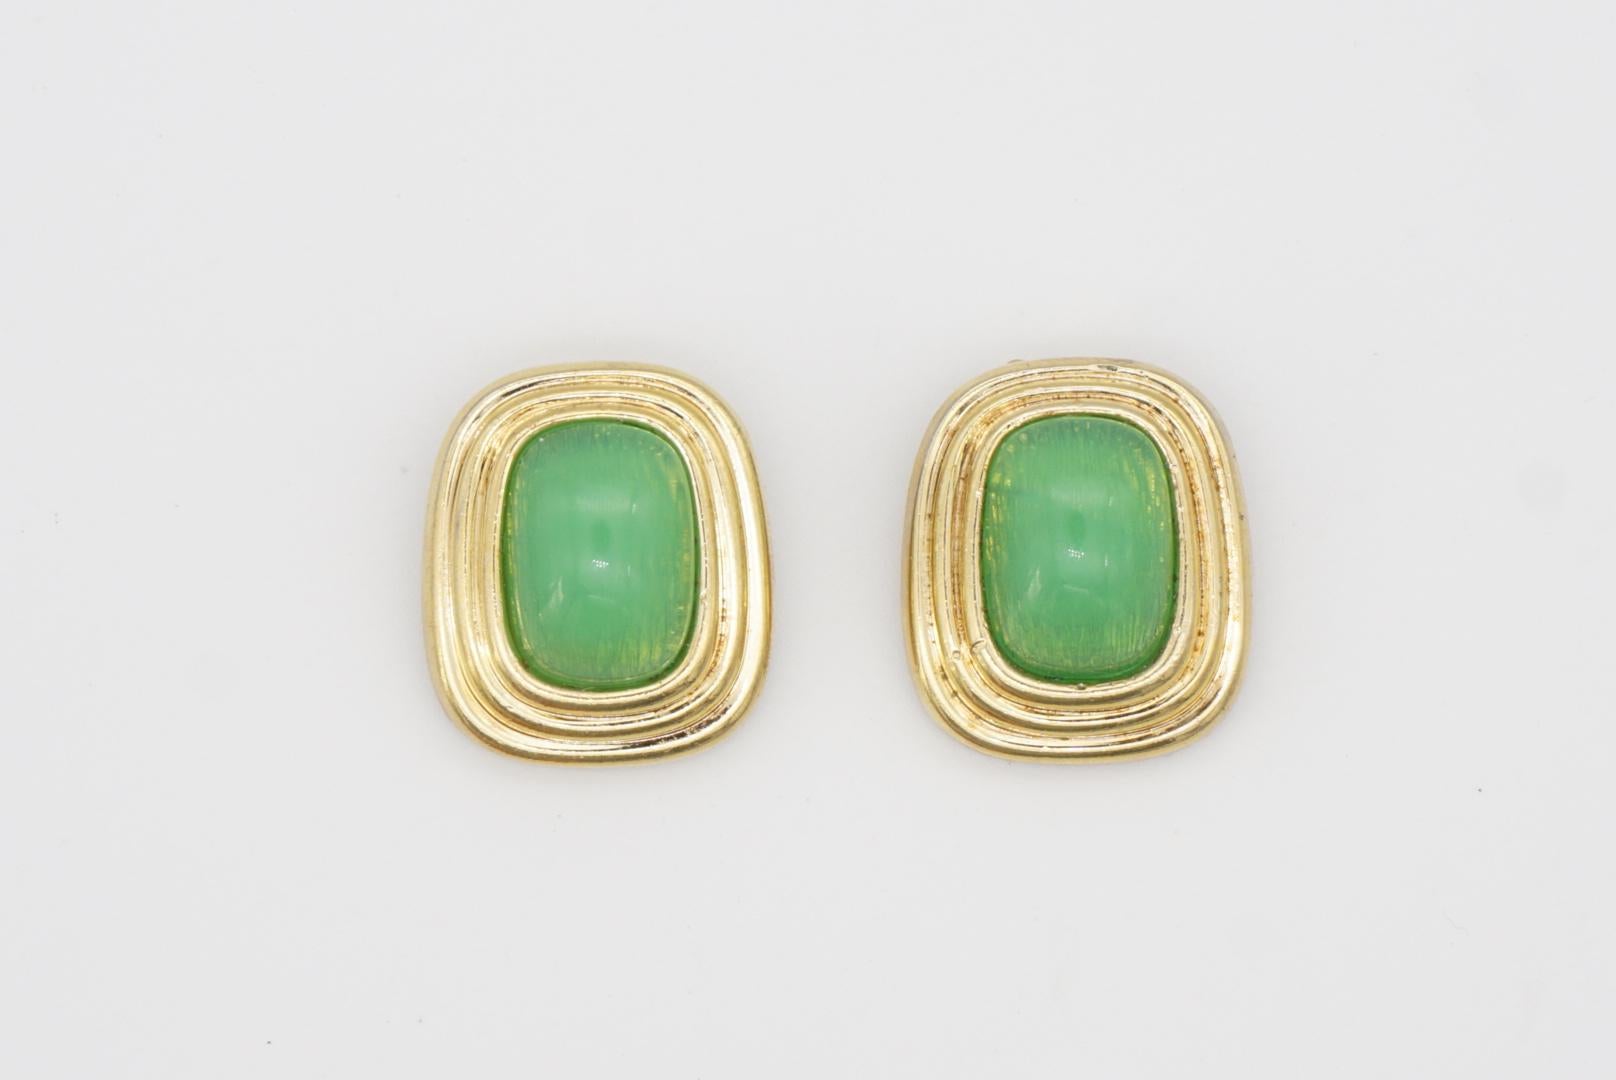 Christian Dior Vintage 1980s Gripoix Emerald Cabochon Rectangle Clip Earrings In Good Condition For Sale In Wokingham, England